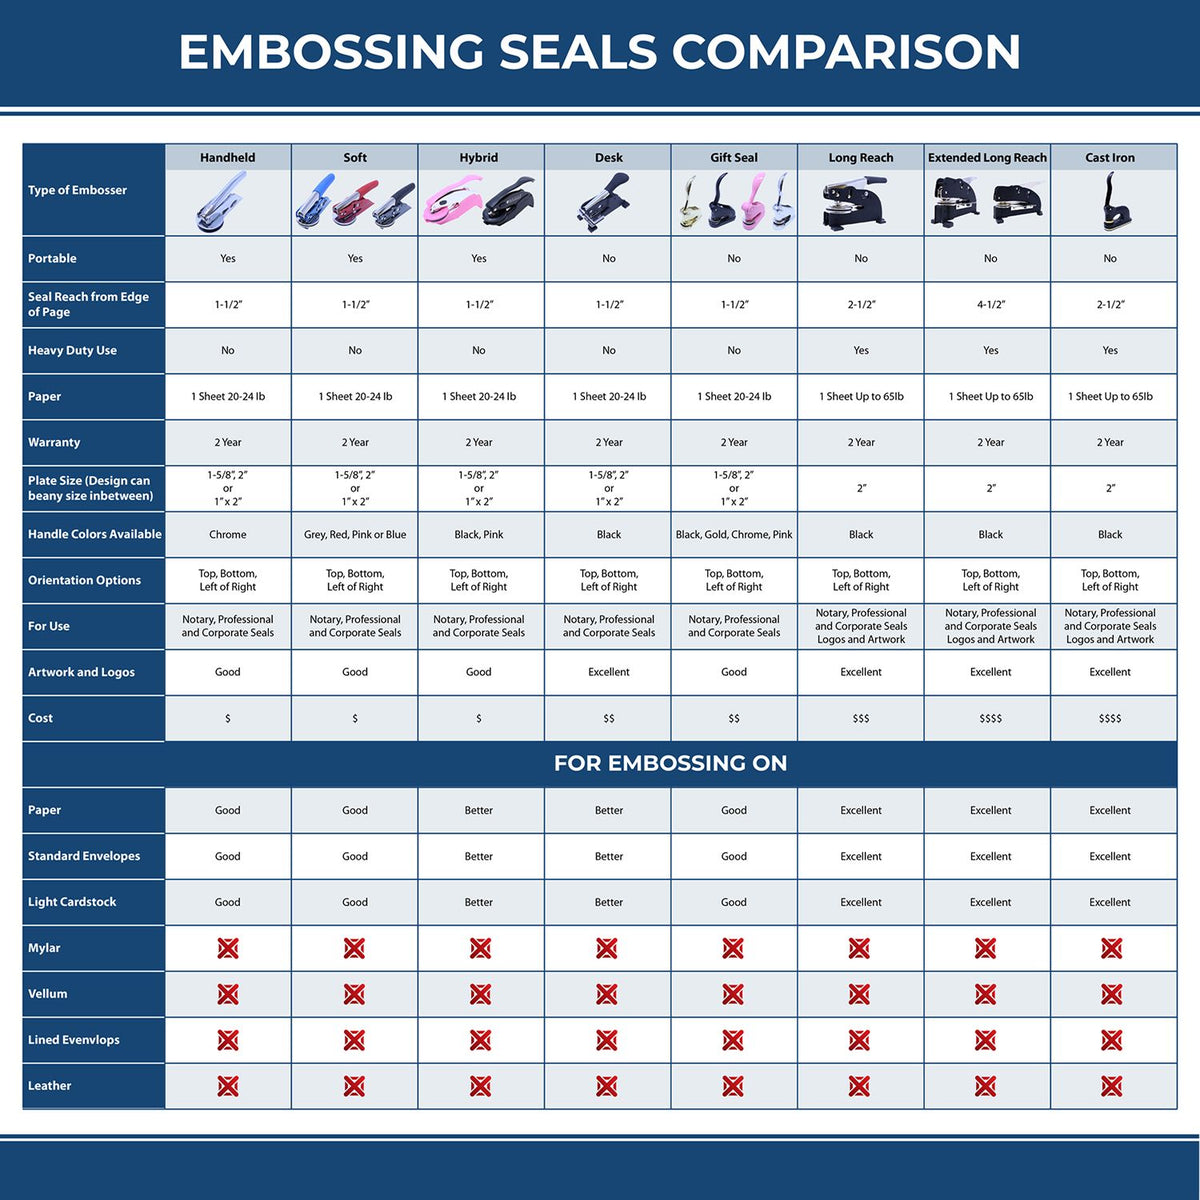 A comparison chart for the different types of mount models available for the Soft Nebraska Professional Engineer Seal.